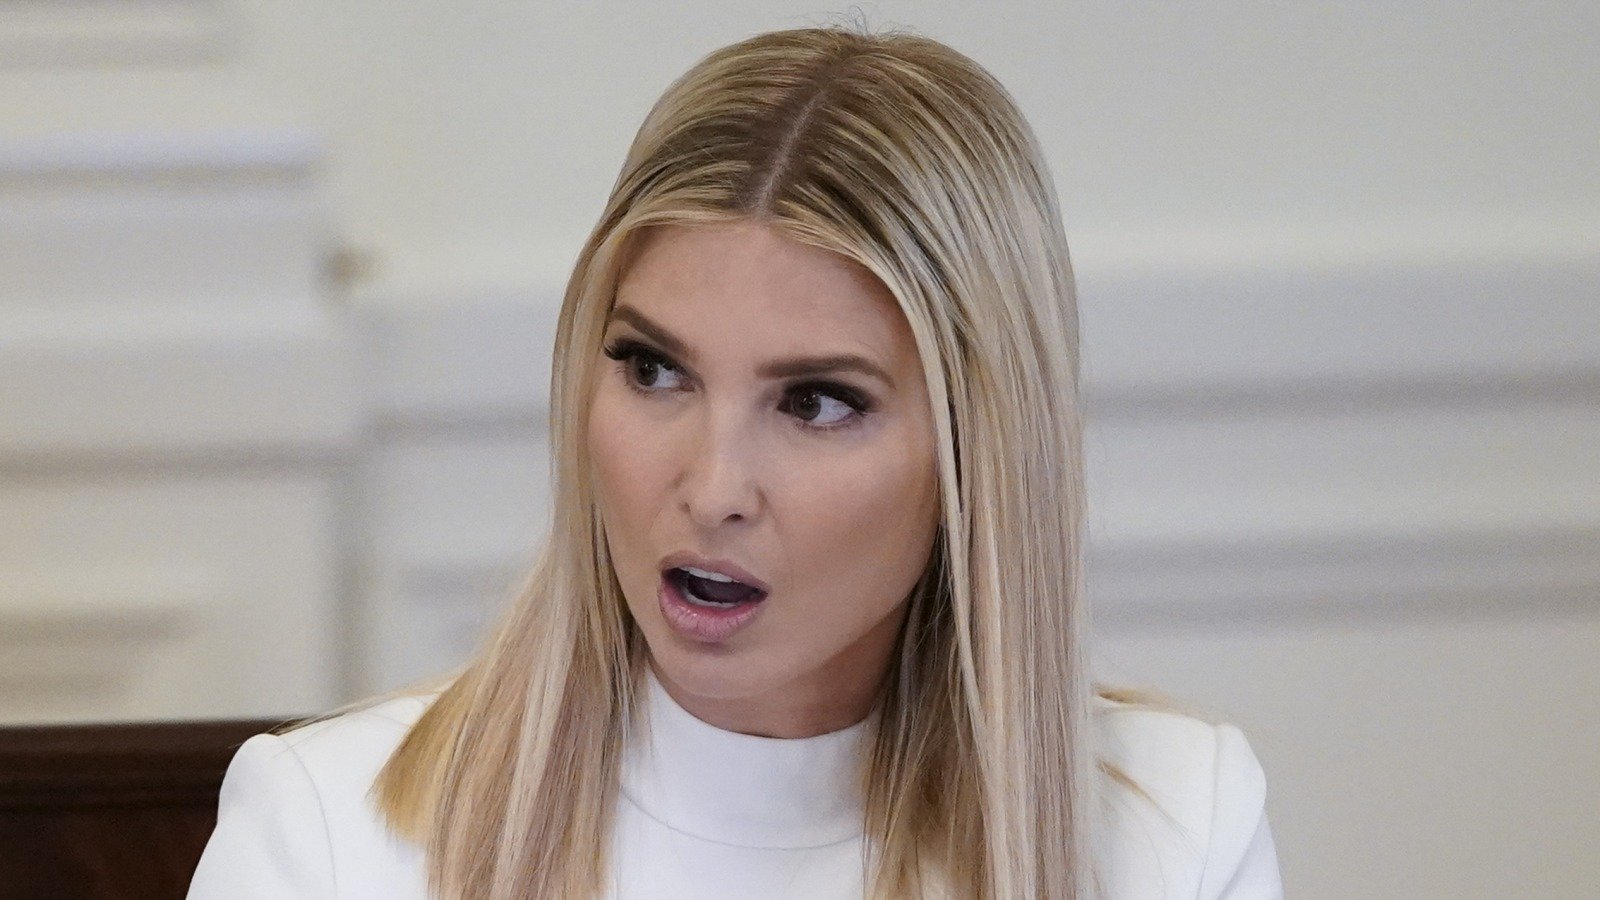 Ivanka Has Changed A Lot Since Being At The White House